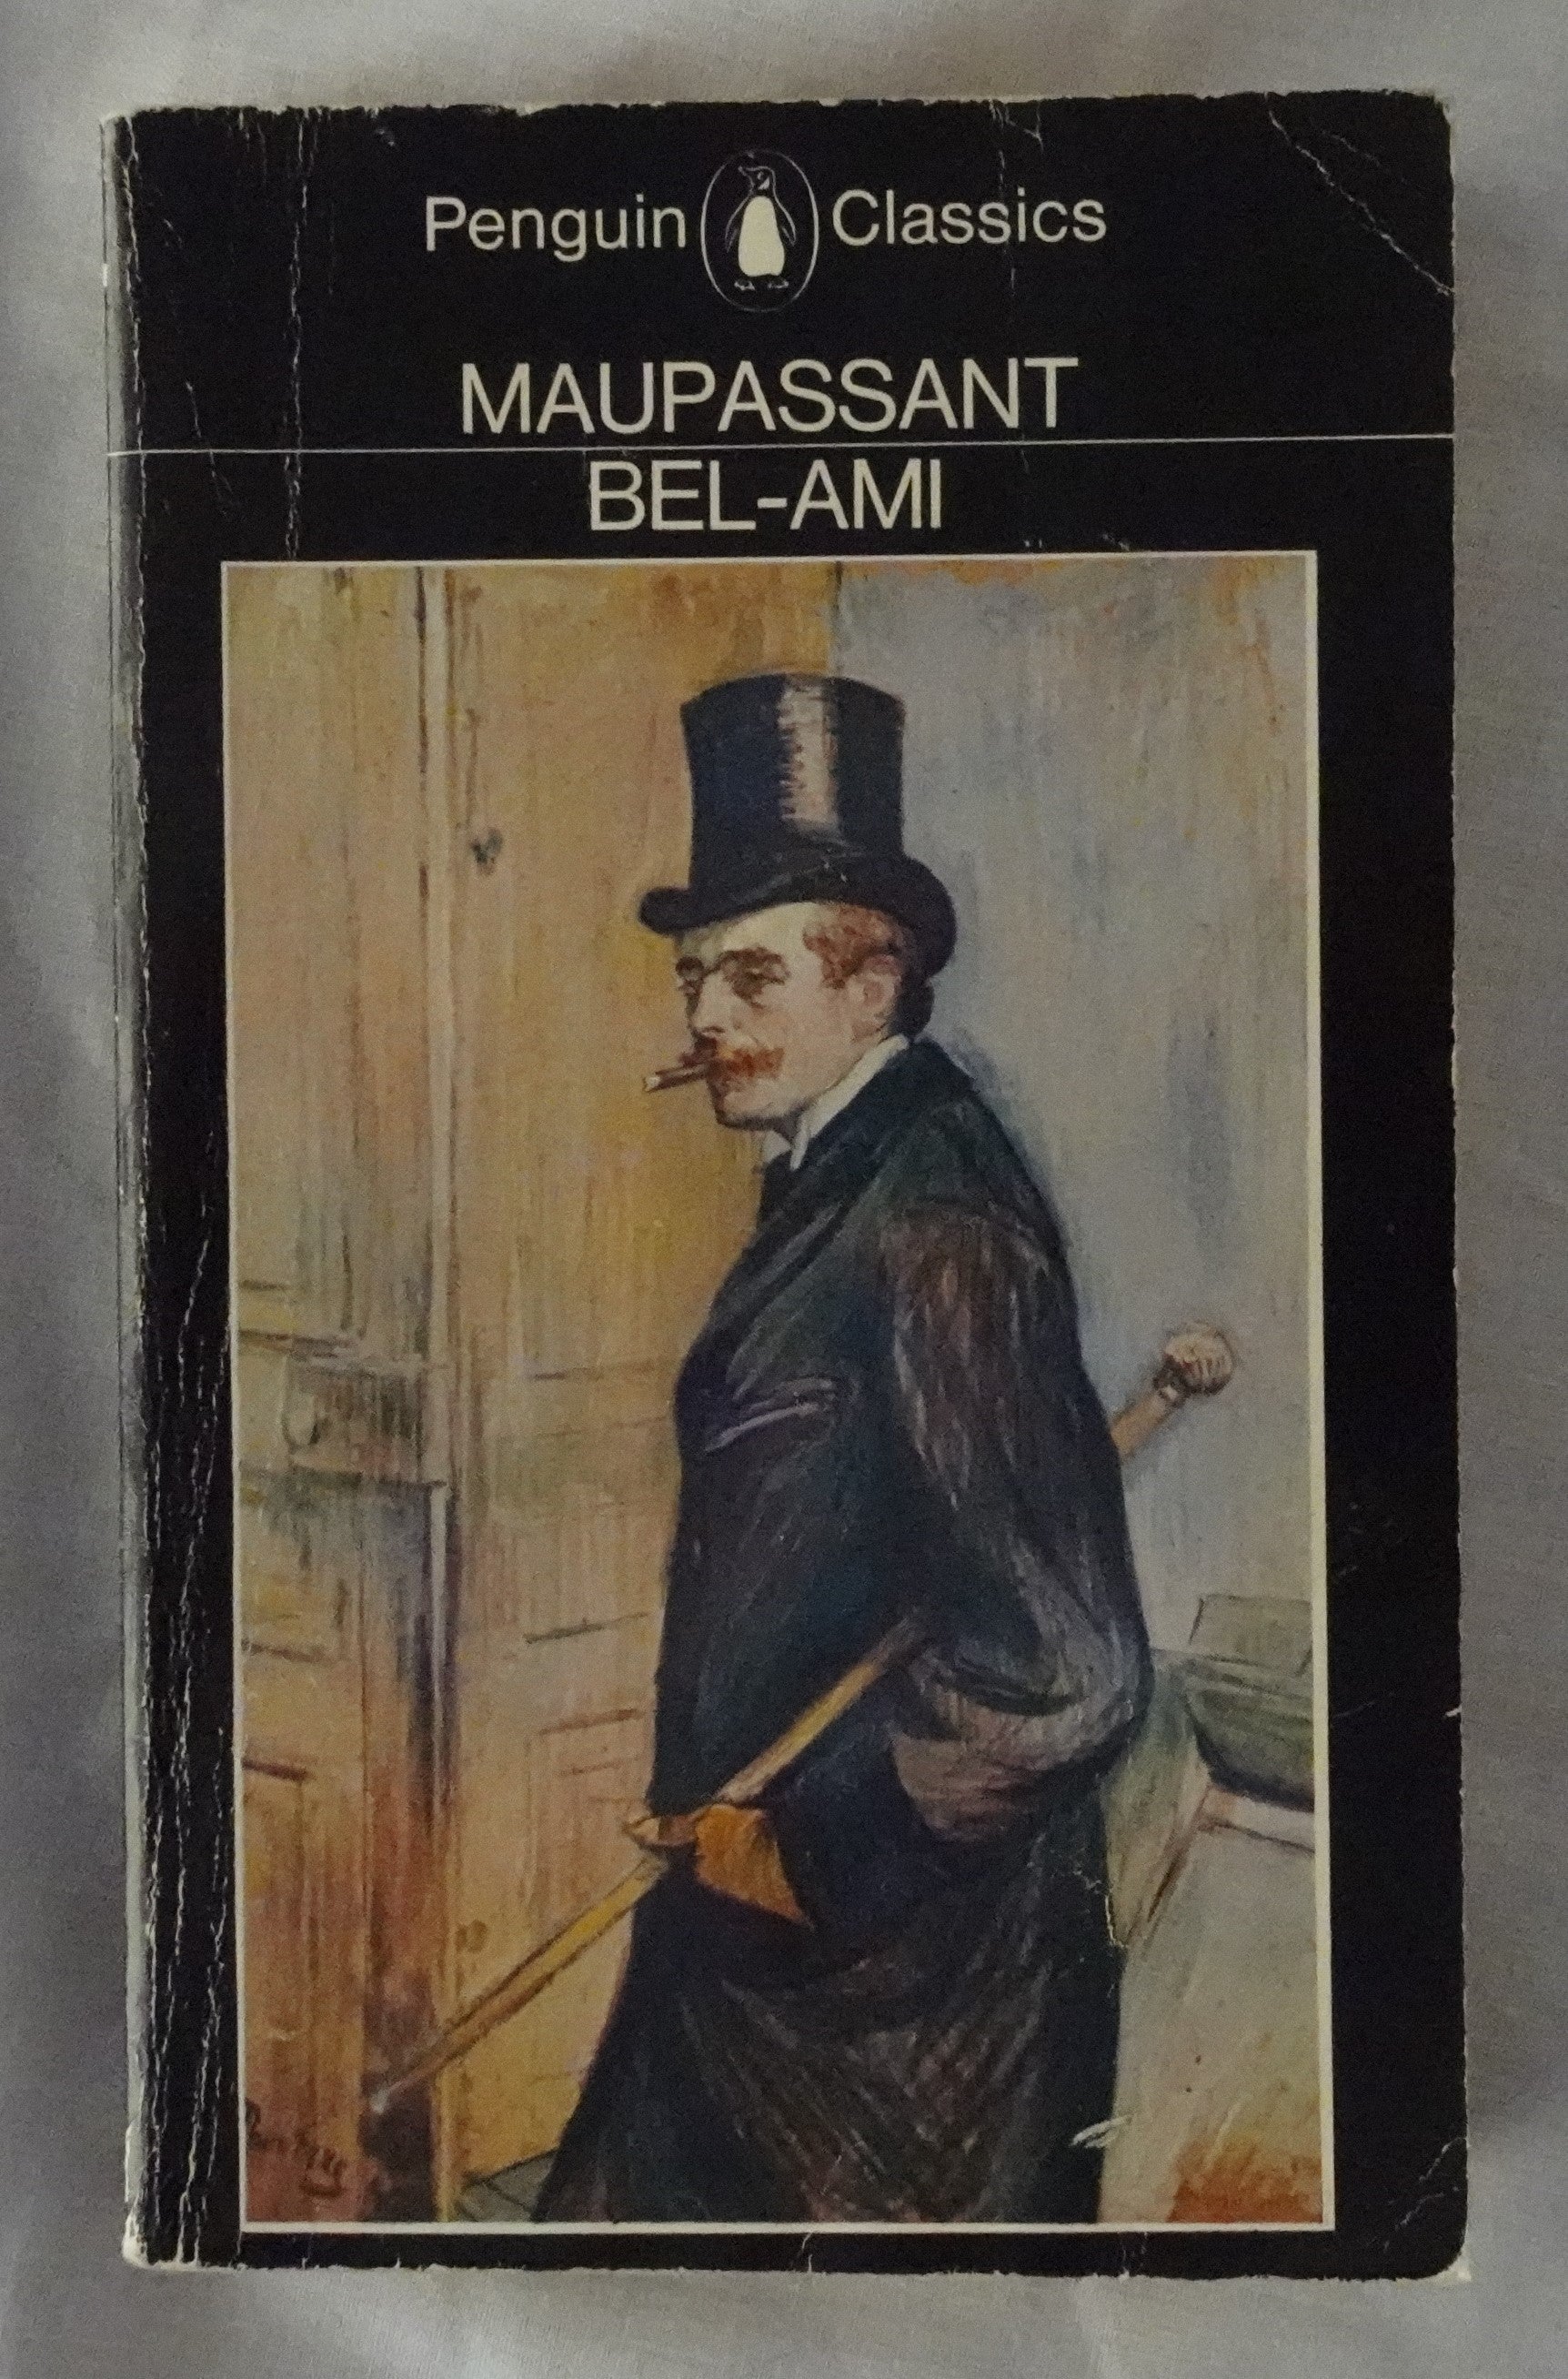 Bel-Ami  by Guy De Maupassant  translated by Douglas Parmee